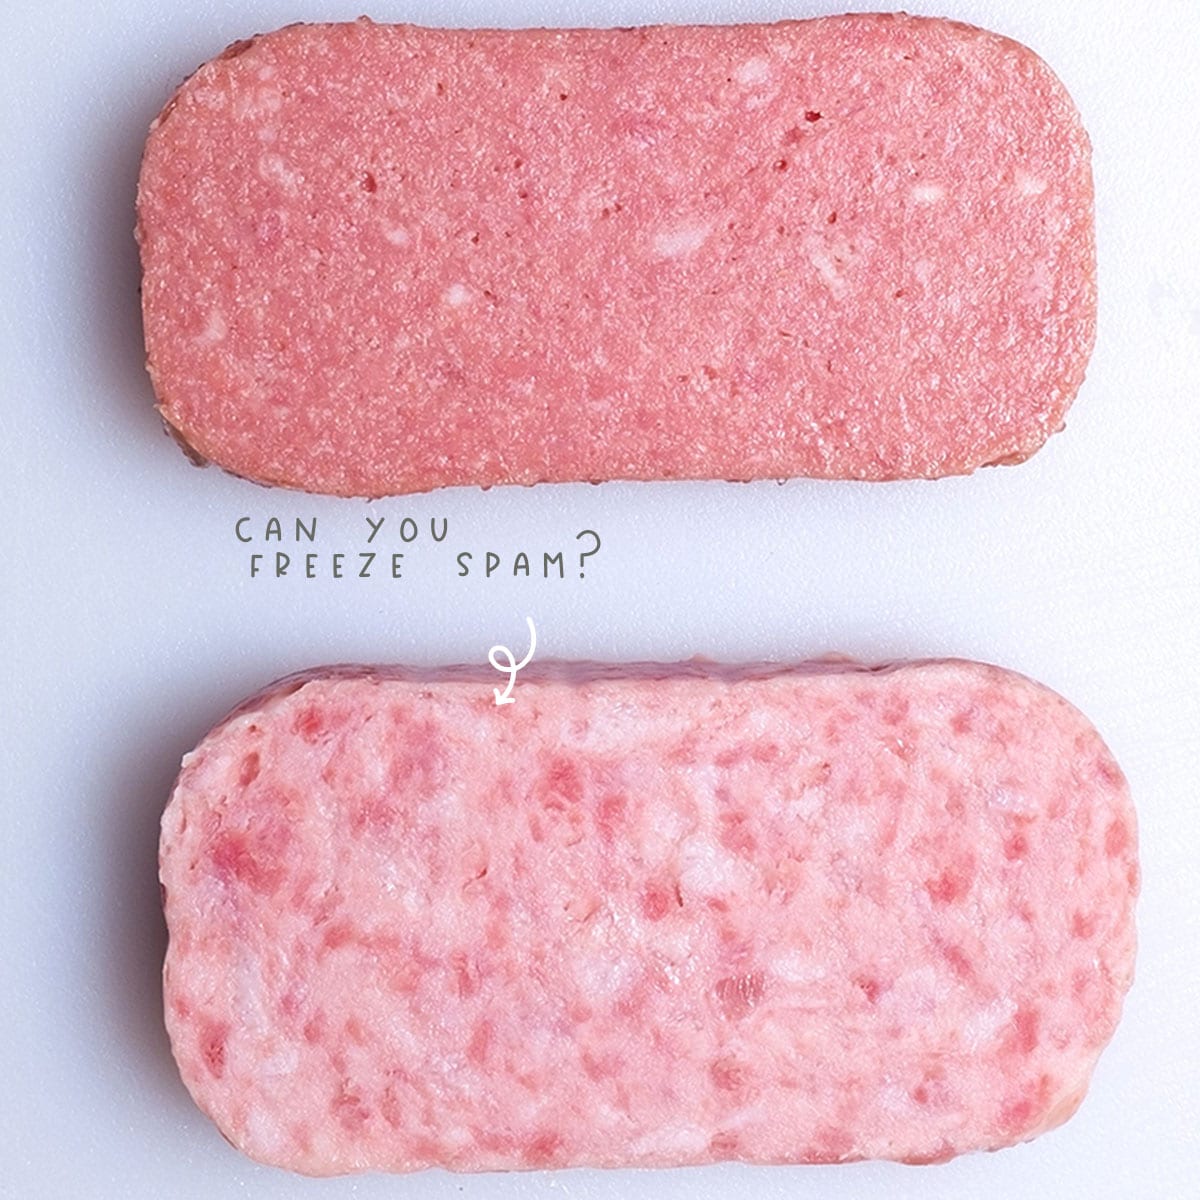 Yes, spam does well when frozen. If you freeze spam, you can expect it to last up to six months in your freezer. This is much longer than the shelf life of opened spam, which is only three to five days.